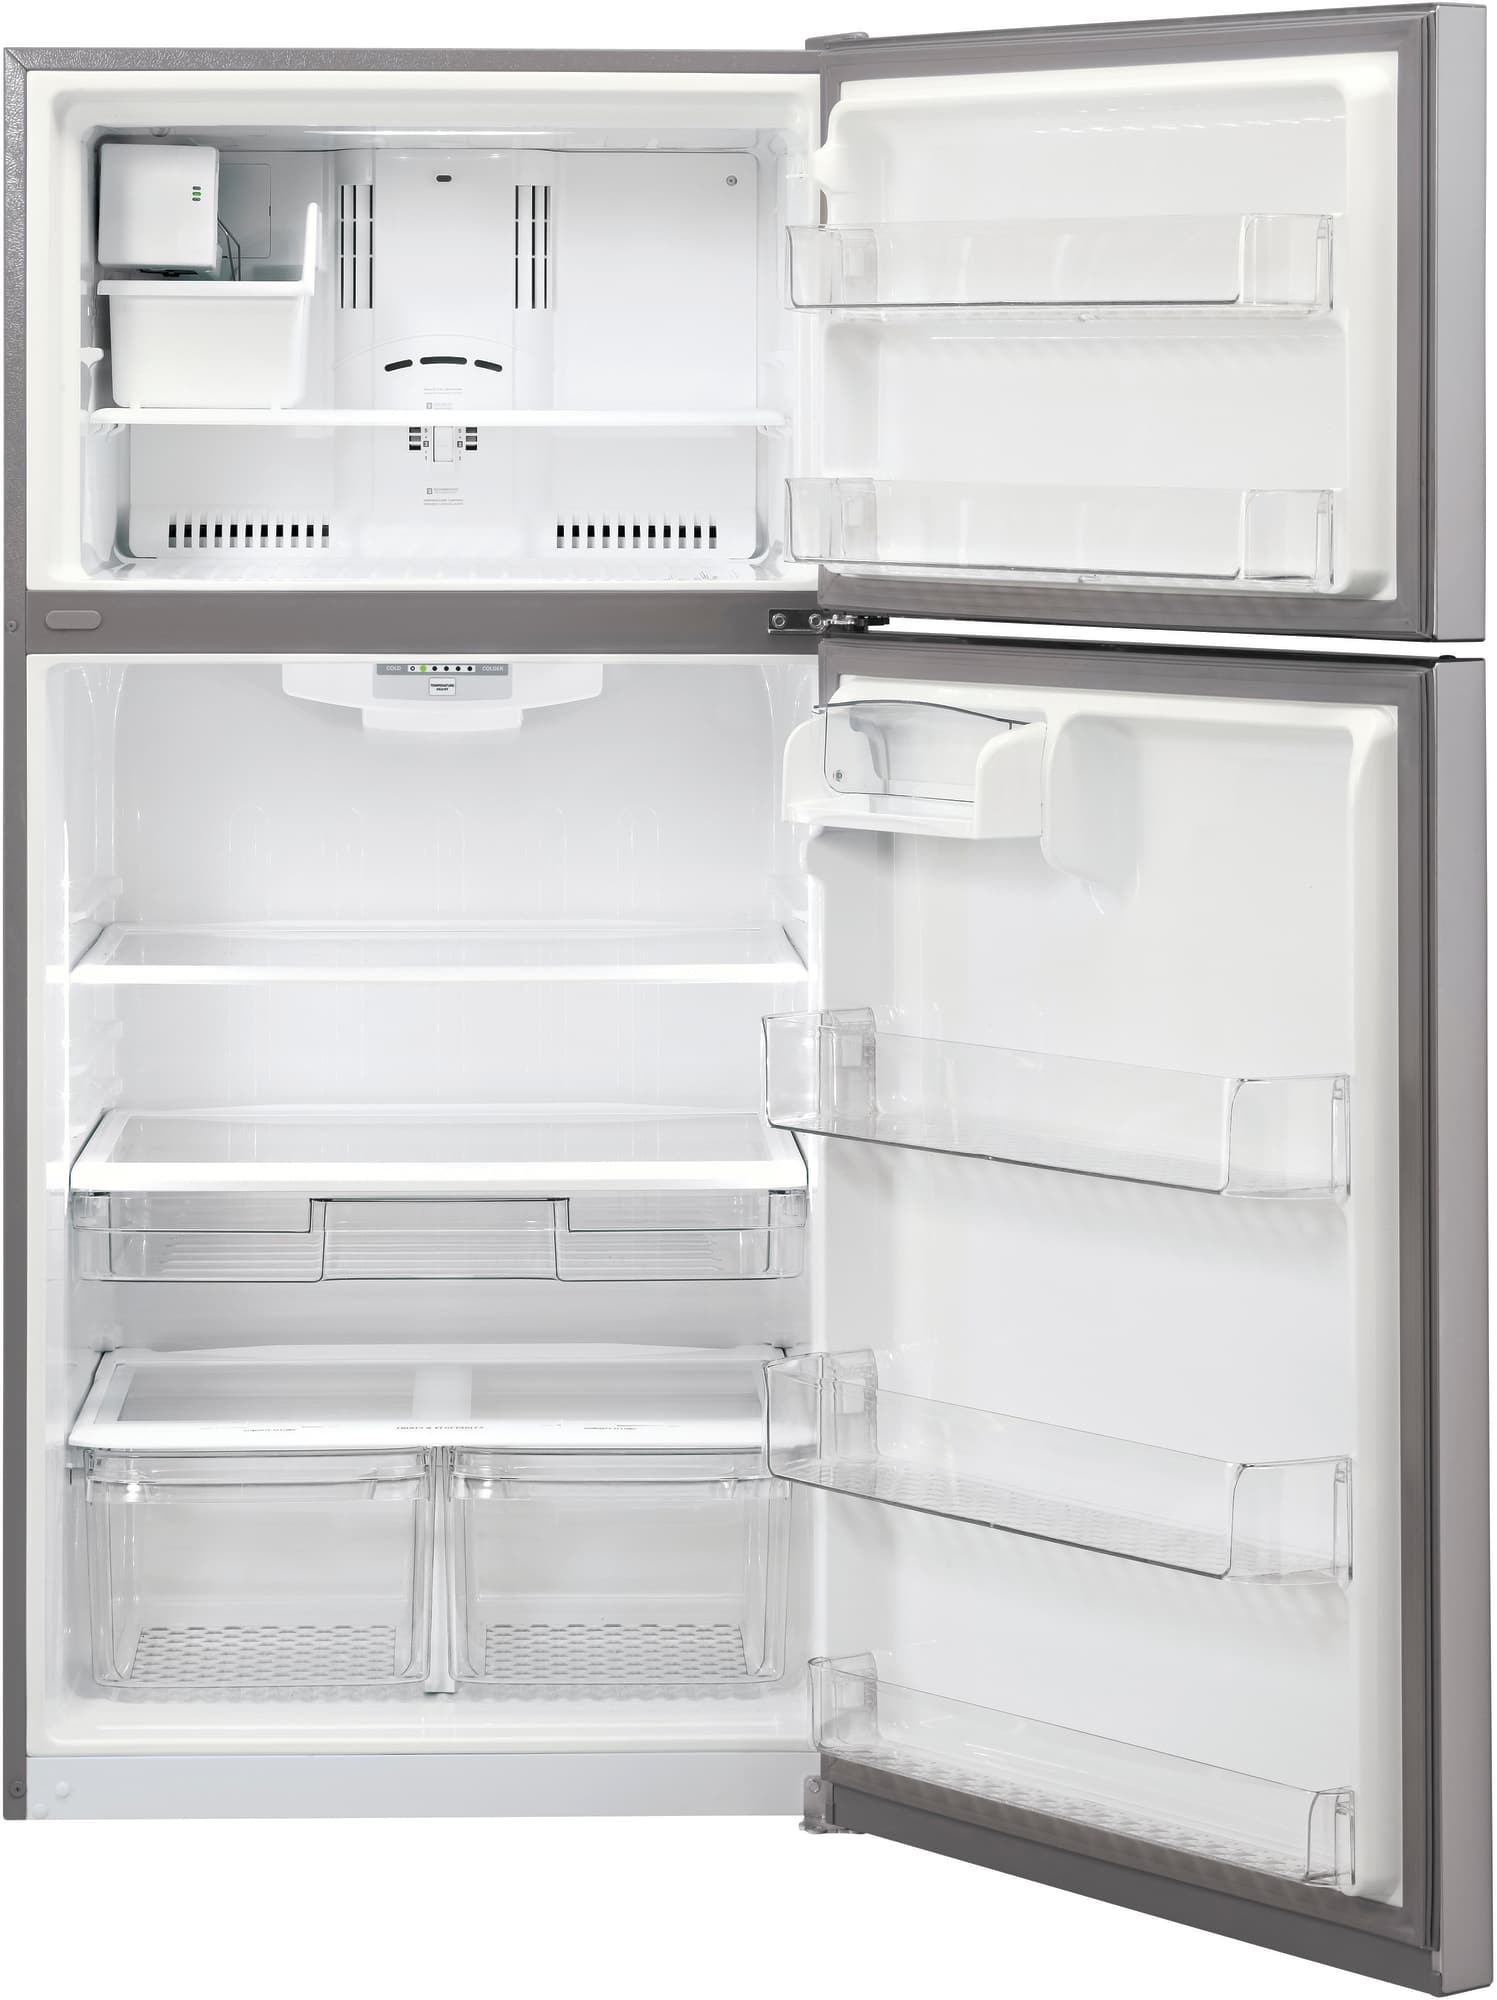 Lg Ltcs24223s 33 Inch Top Freezer Refrigerator With 23 8 Cu Ft Total Capacity Tempered Glass